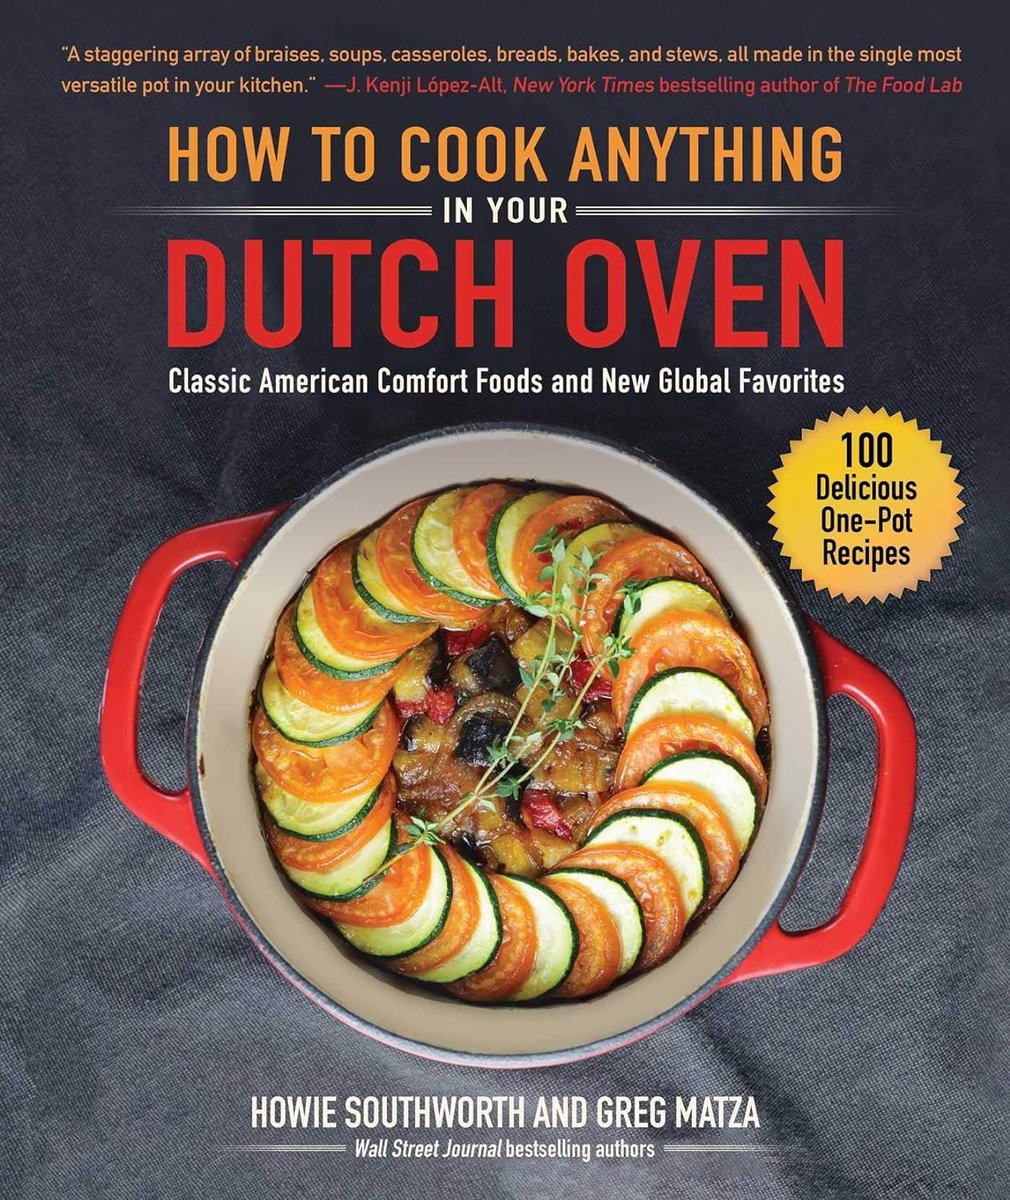 Thanksgiving SOLVED! #11 in Dutch Oven Recipes #13 in Cast Iron Recipes #72 in Slow Cooker Recipes (Books) 'Premature Corned Beef Hash?!' GENIUS a.co/d/3o4Sd9E